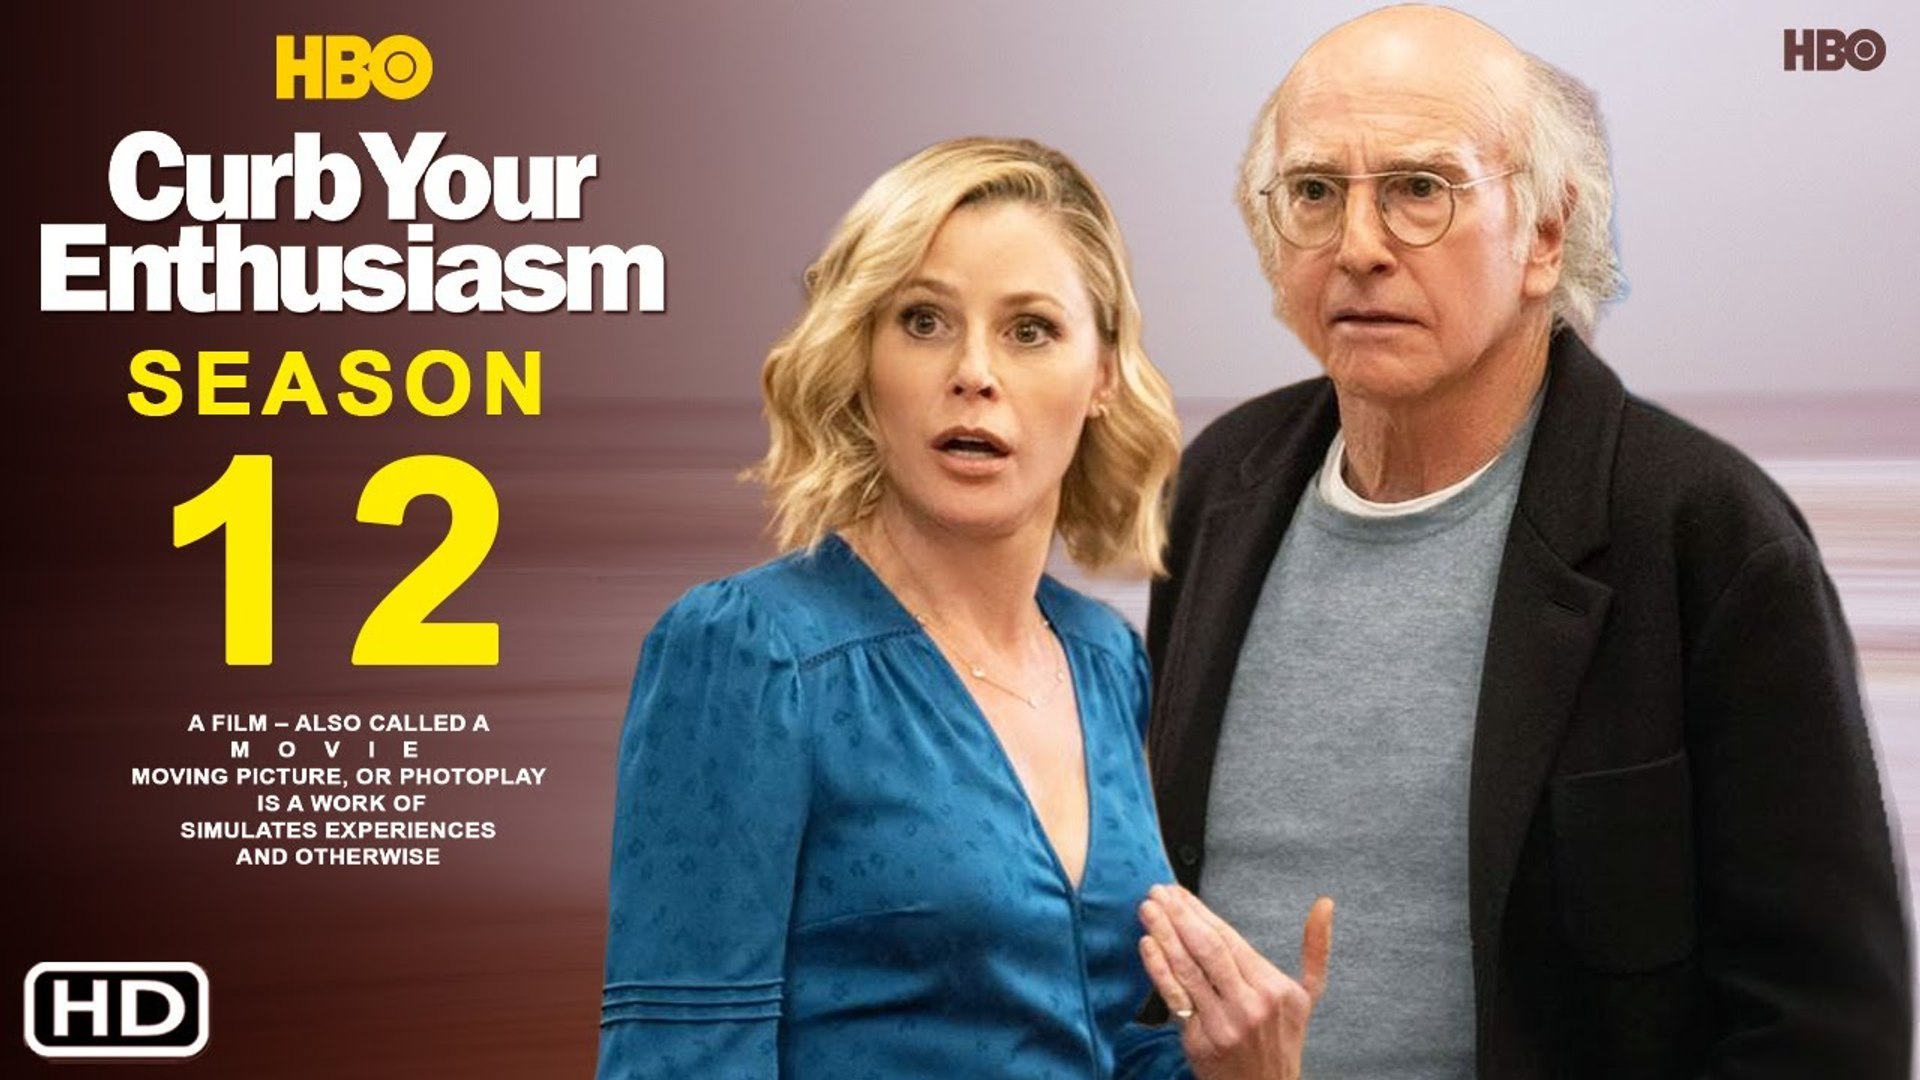 Curb Your Enthusiasm Season 12 Teaser - HBO, Release Date & Preview - video  Dailymotion